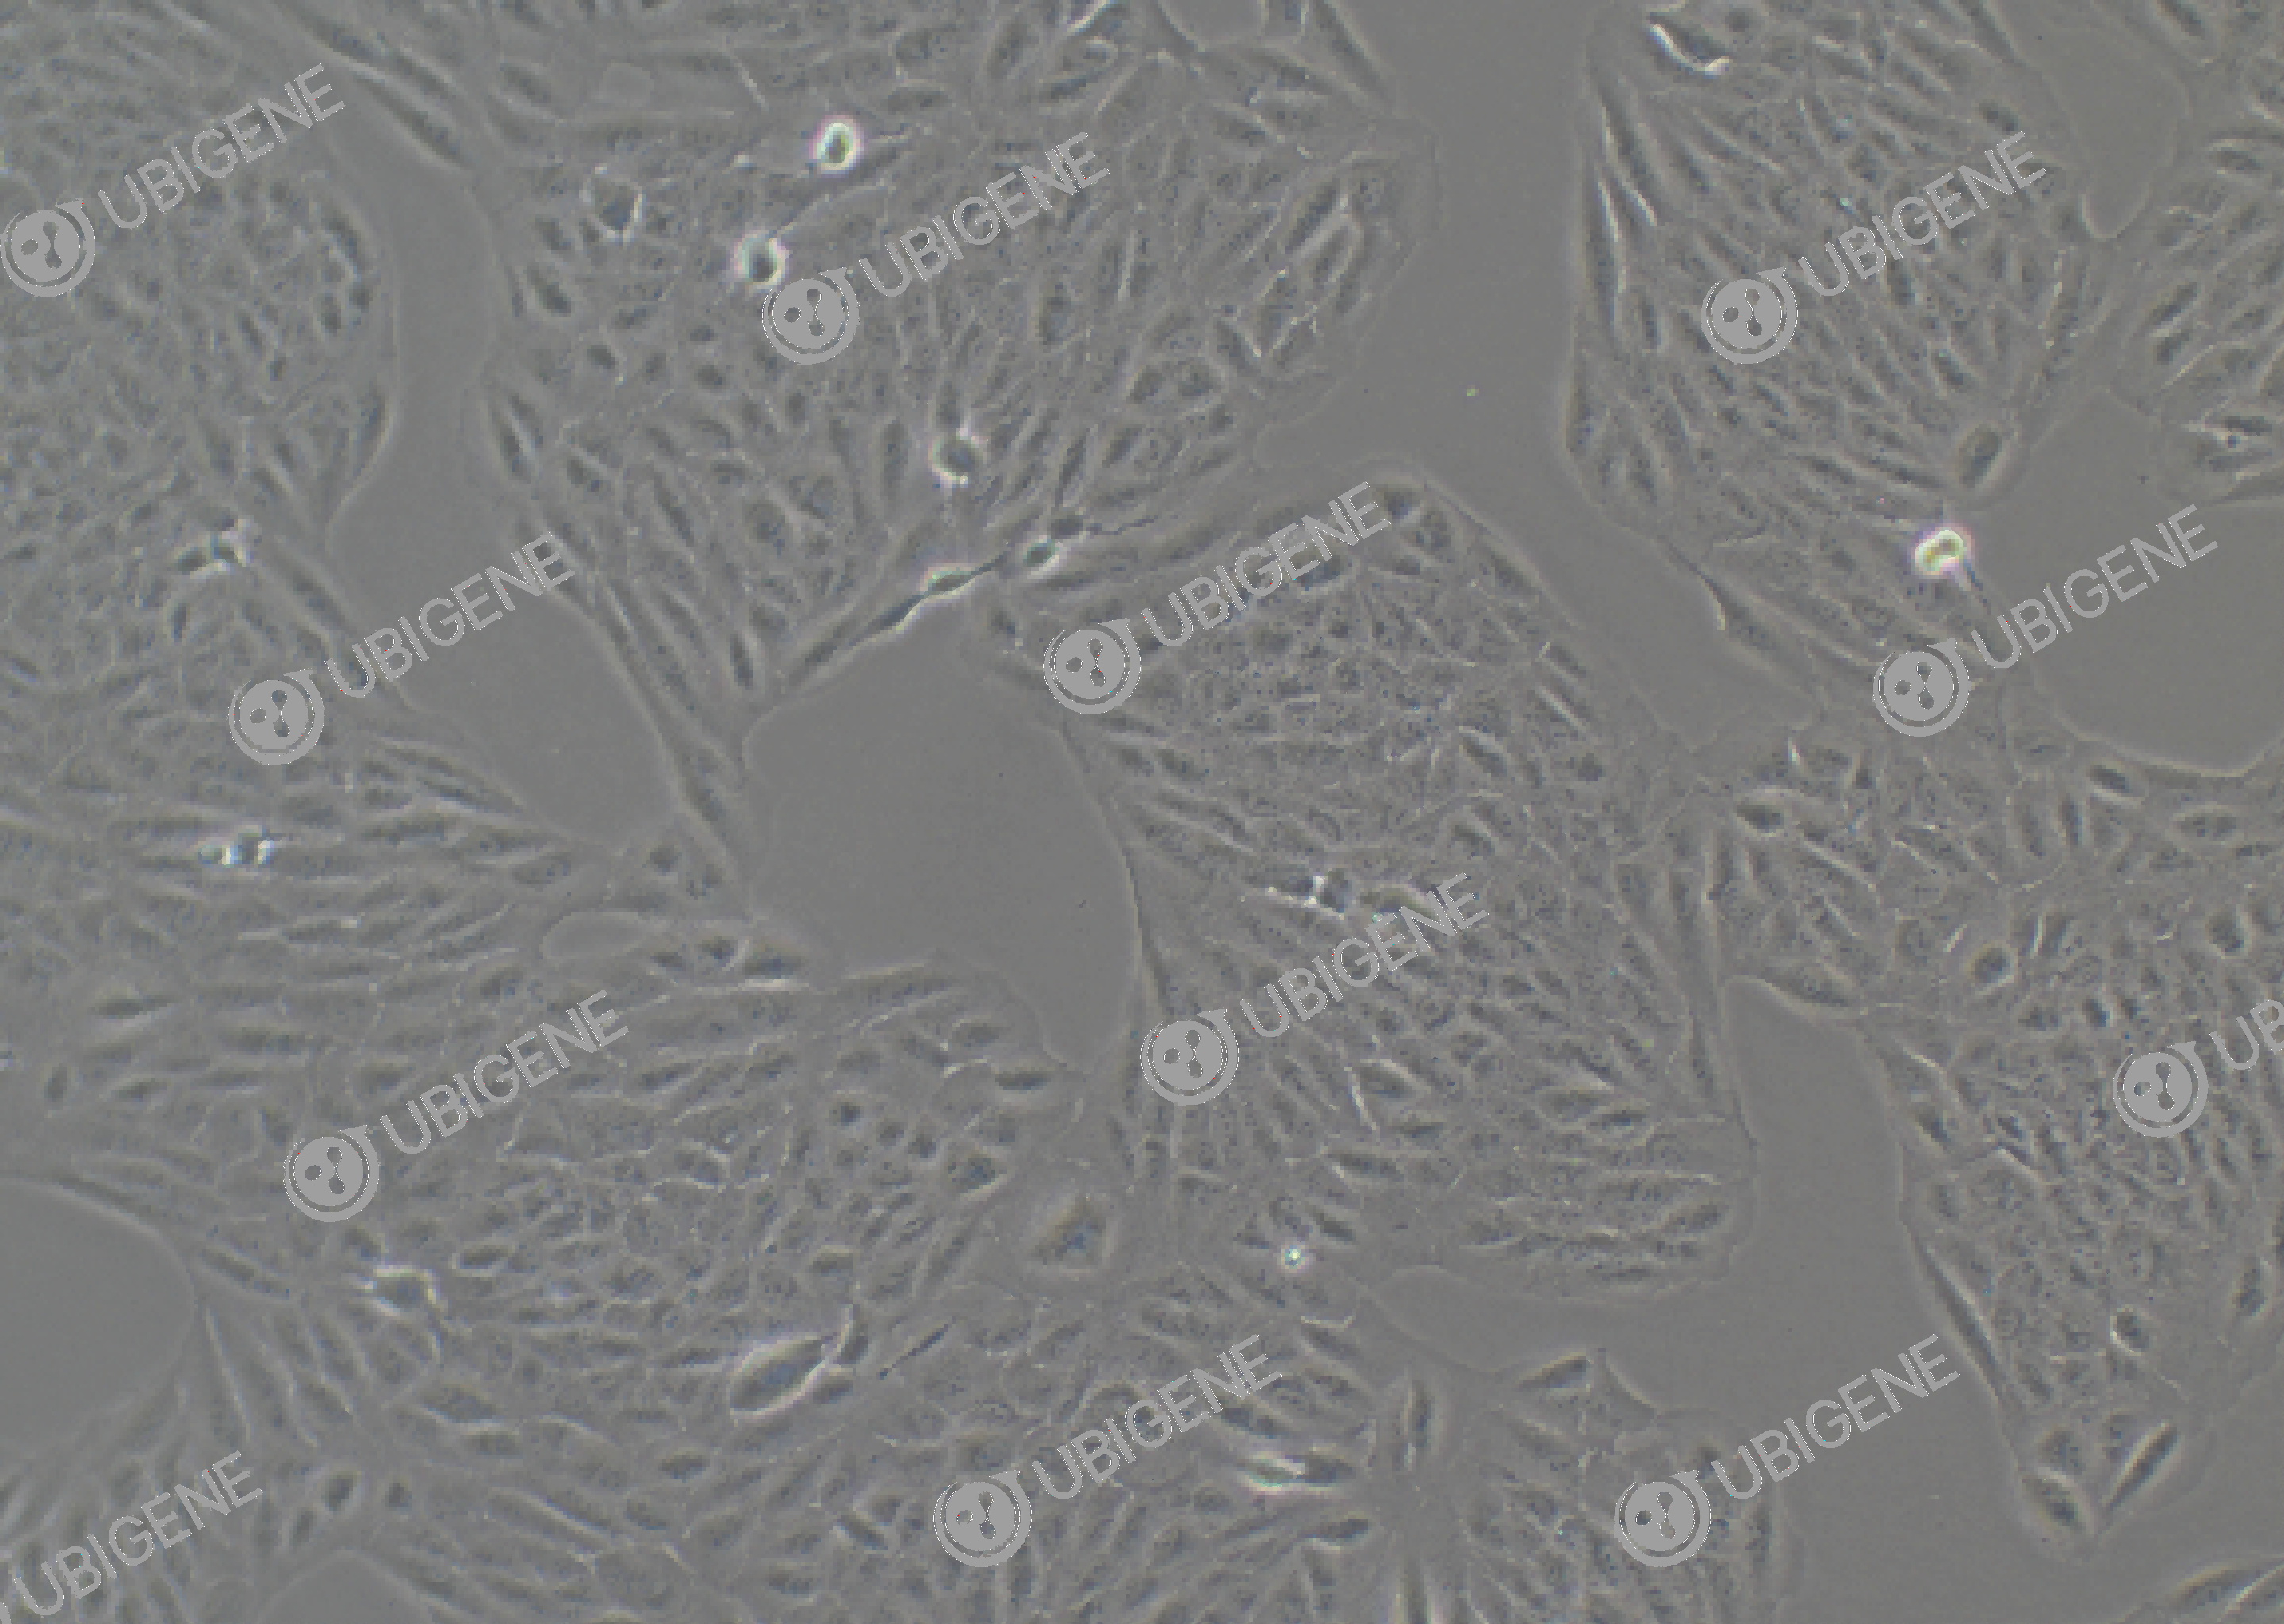 ARPE-19 cell line Cultured cell morphology